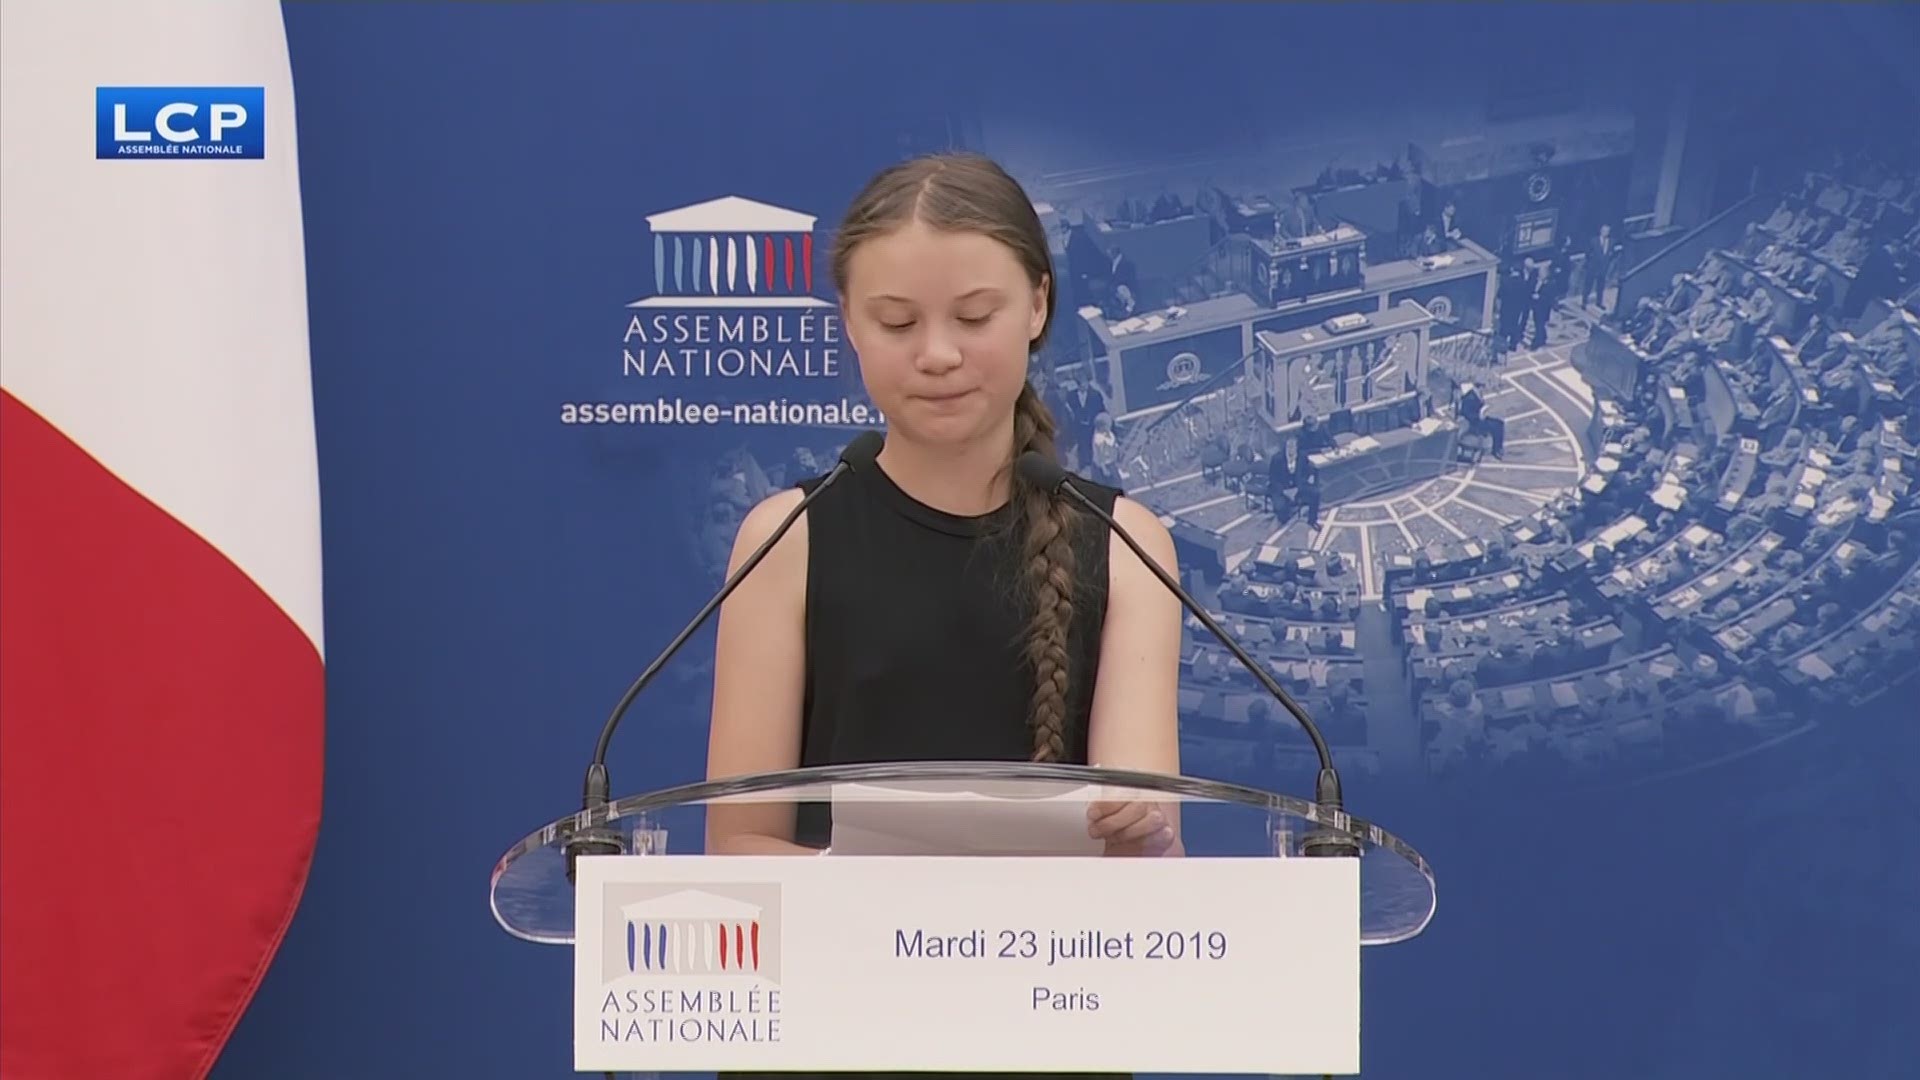 Swedish climate activist Greta Thunberg told the National Assembly in Paris that the world was dangerously close to irreversible climate breakdown by 2030.